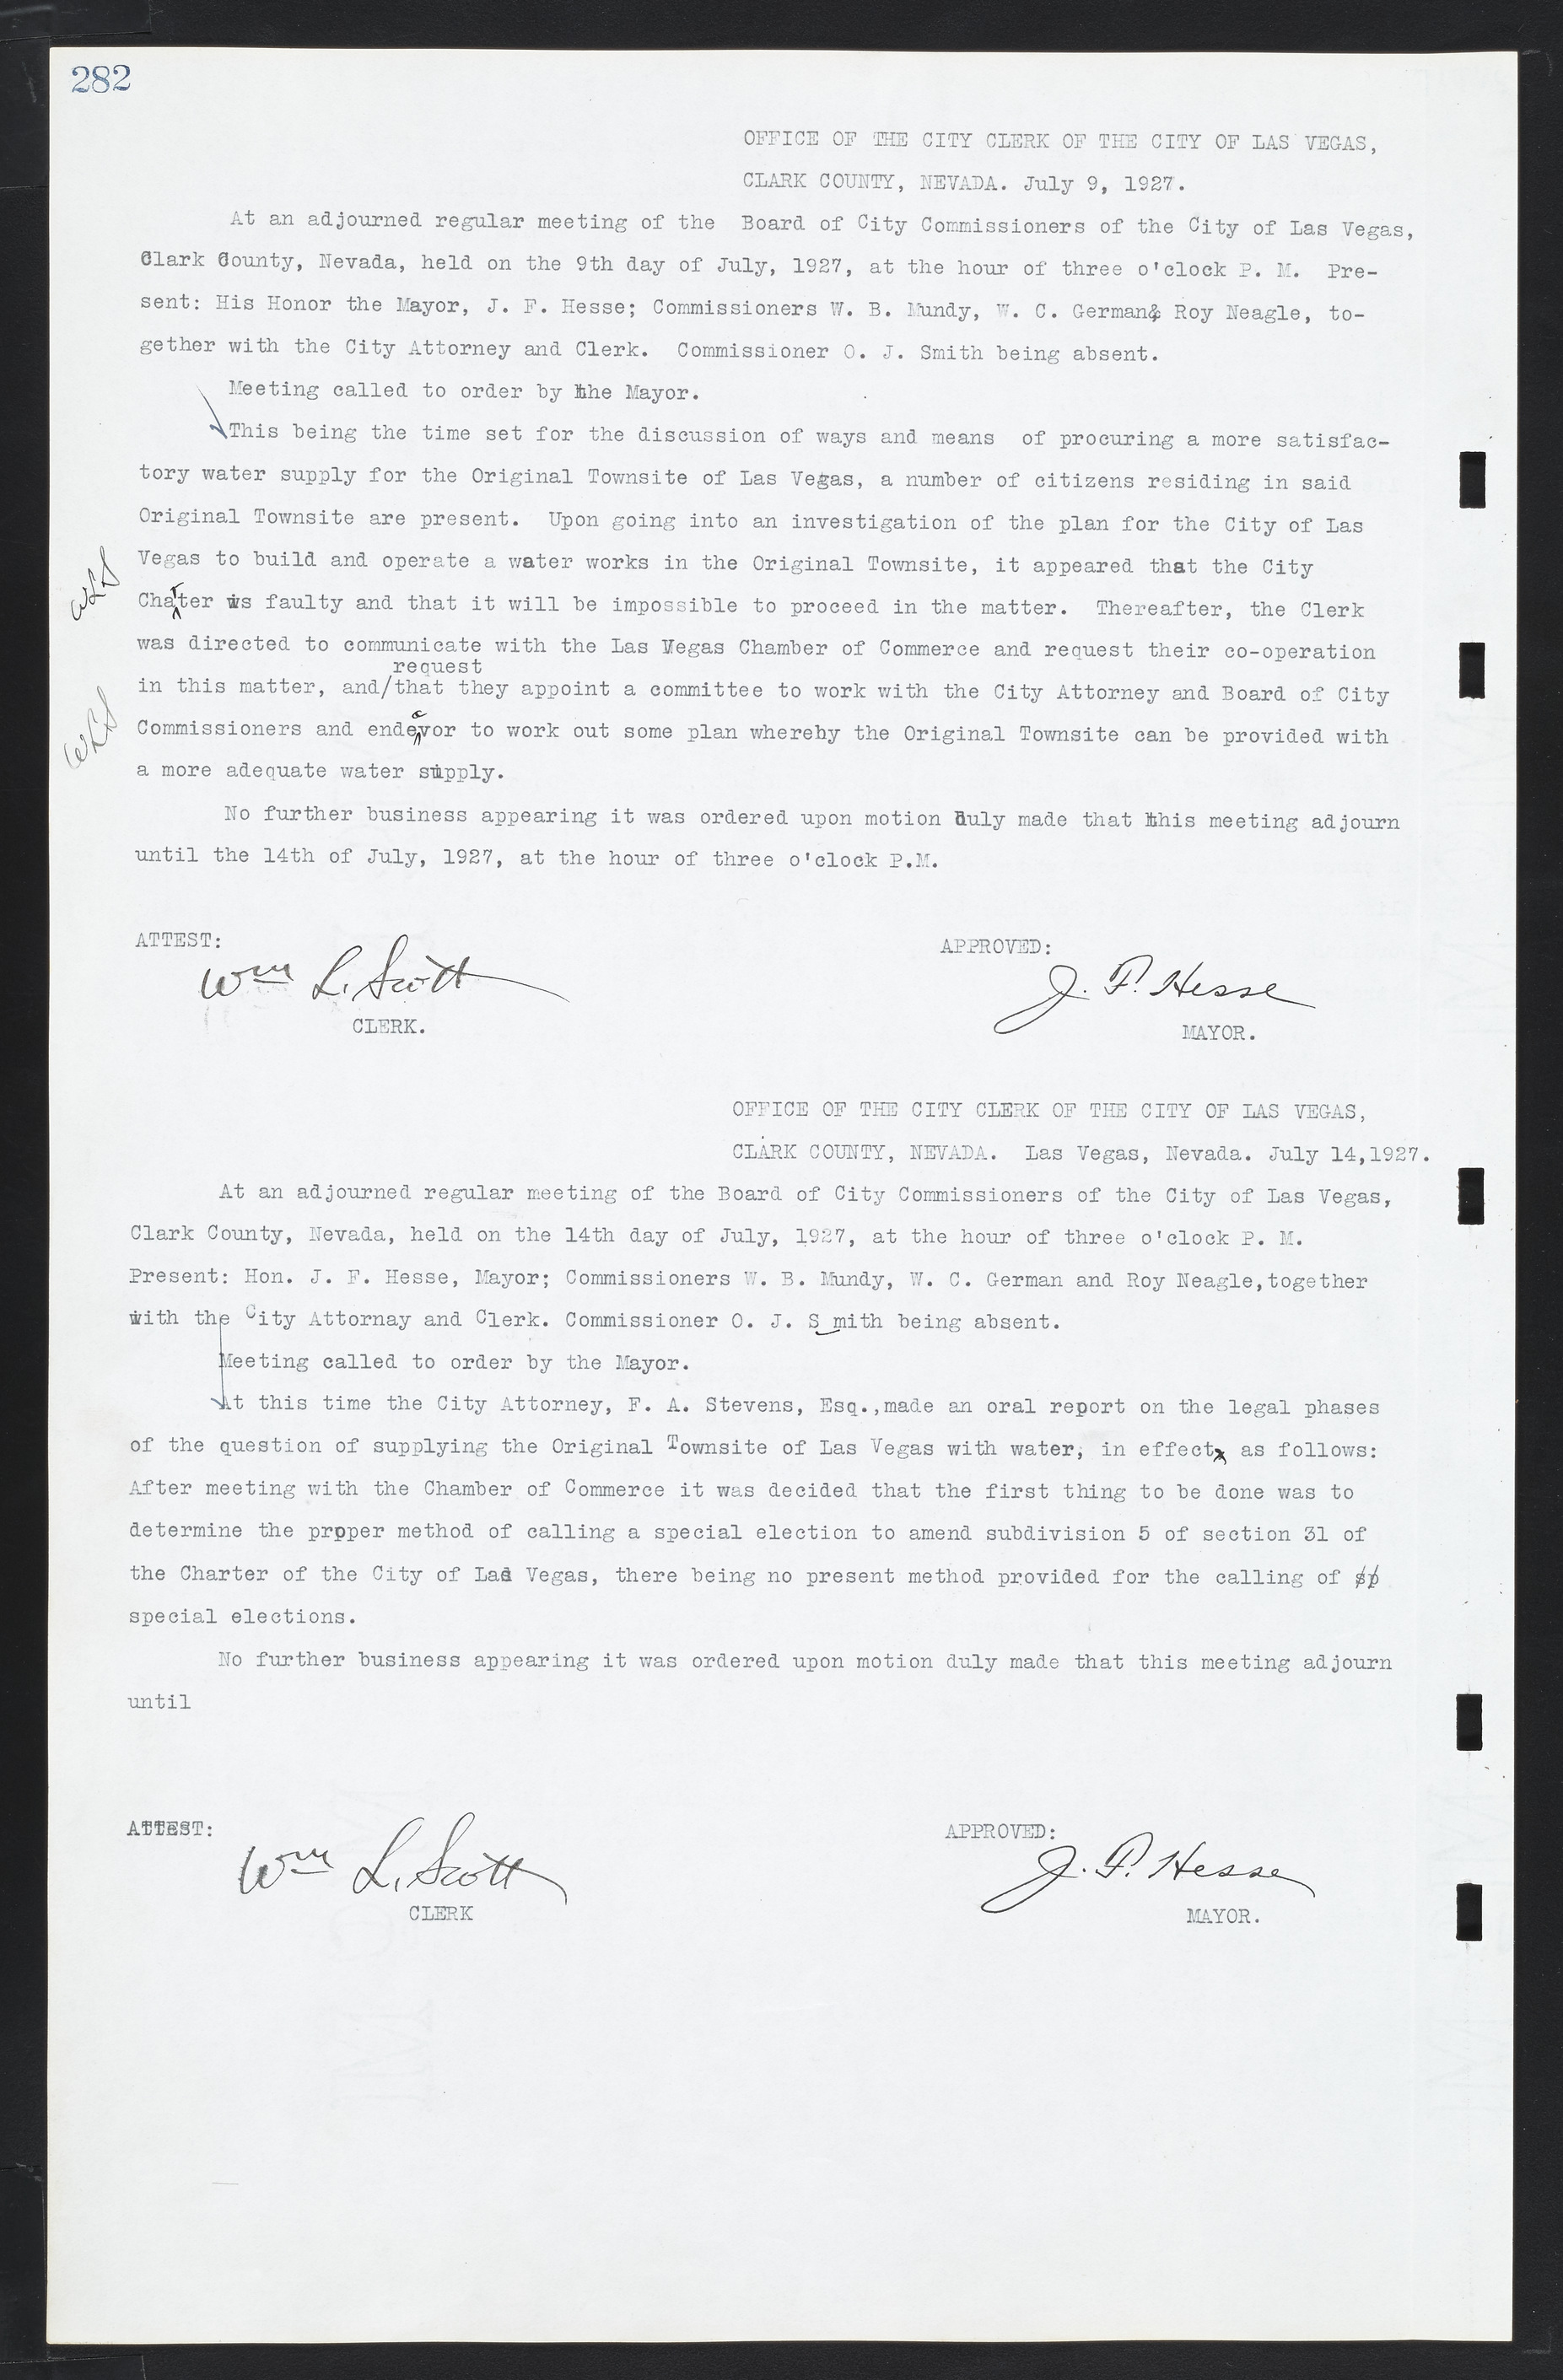 Las Vegas City Commission Minutes, March 1, 1922 to May 10, 1929, lvc000002-291